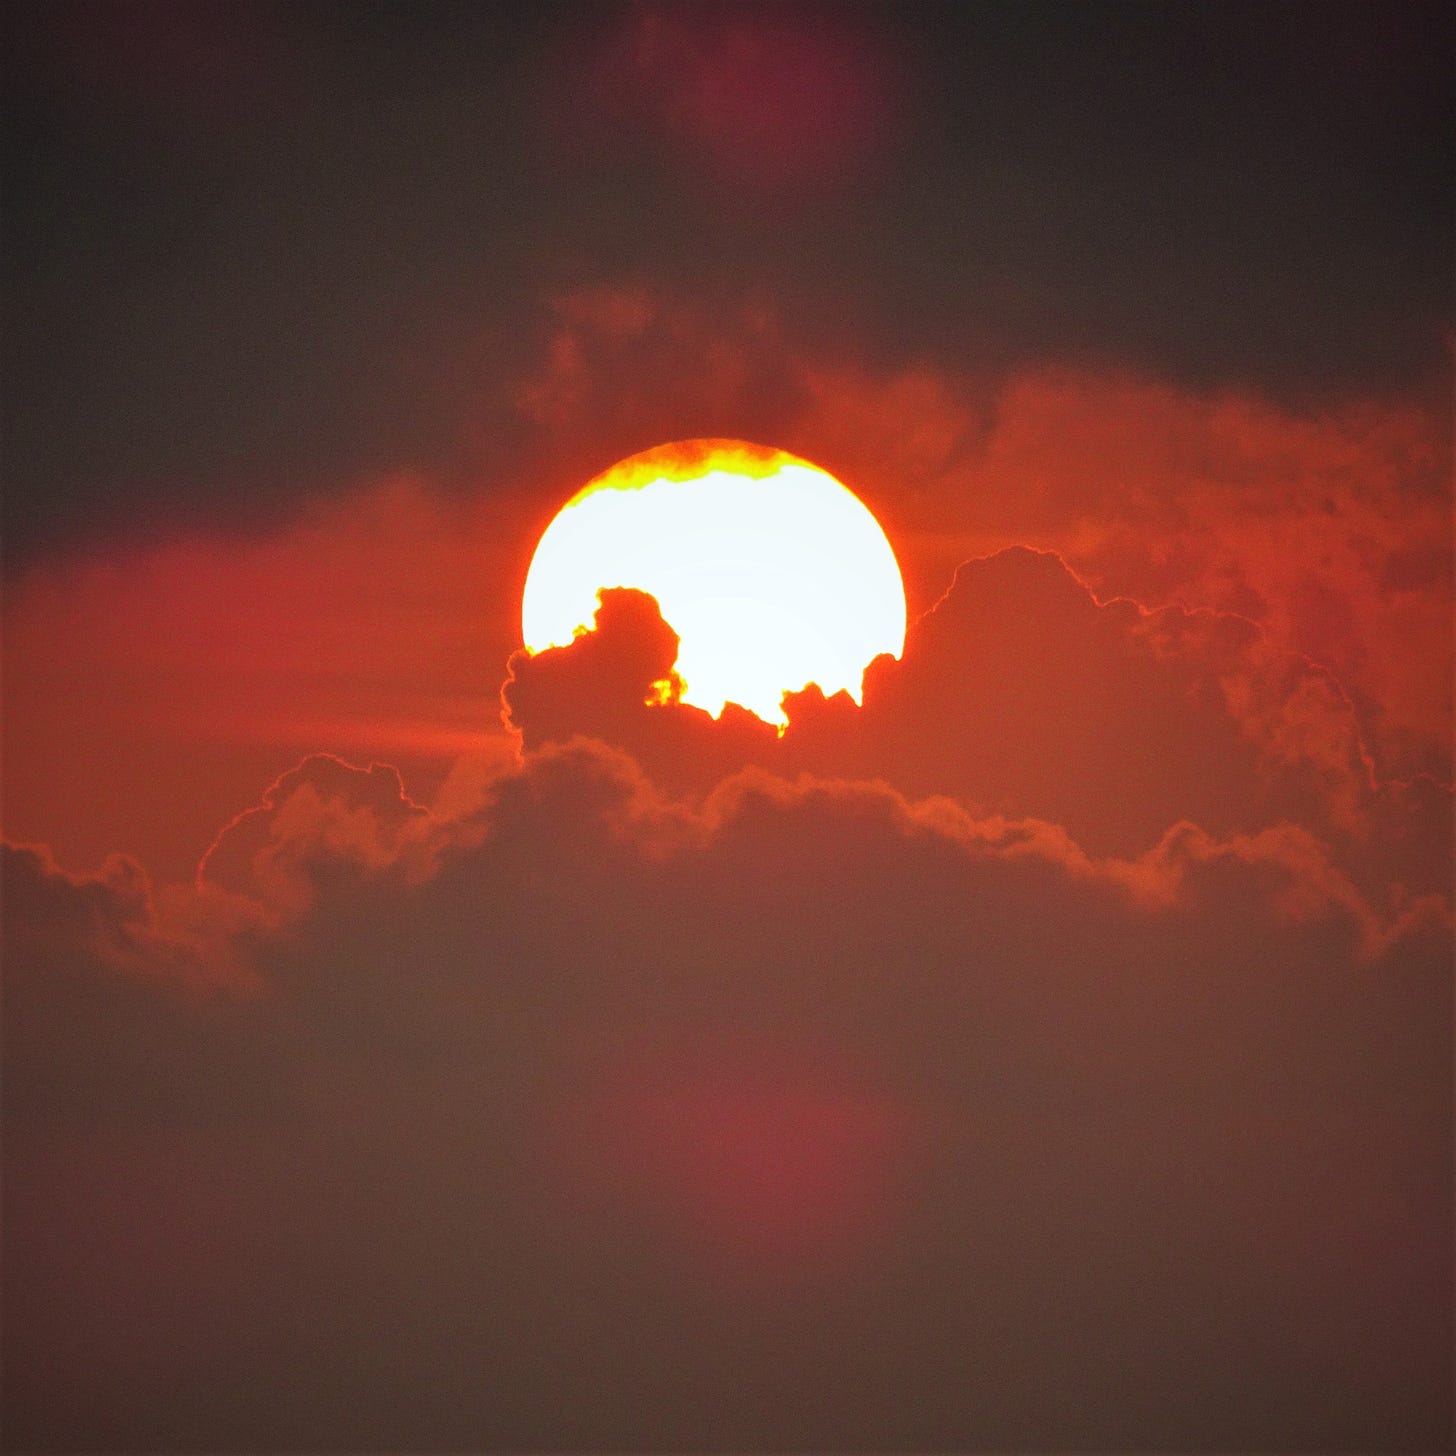 A glowing orange sun sets behind multiple layers of cumulus clouds.